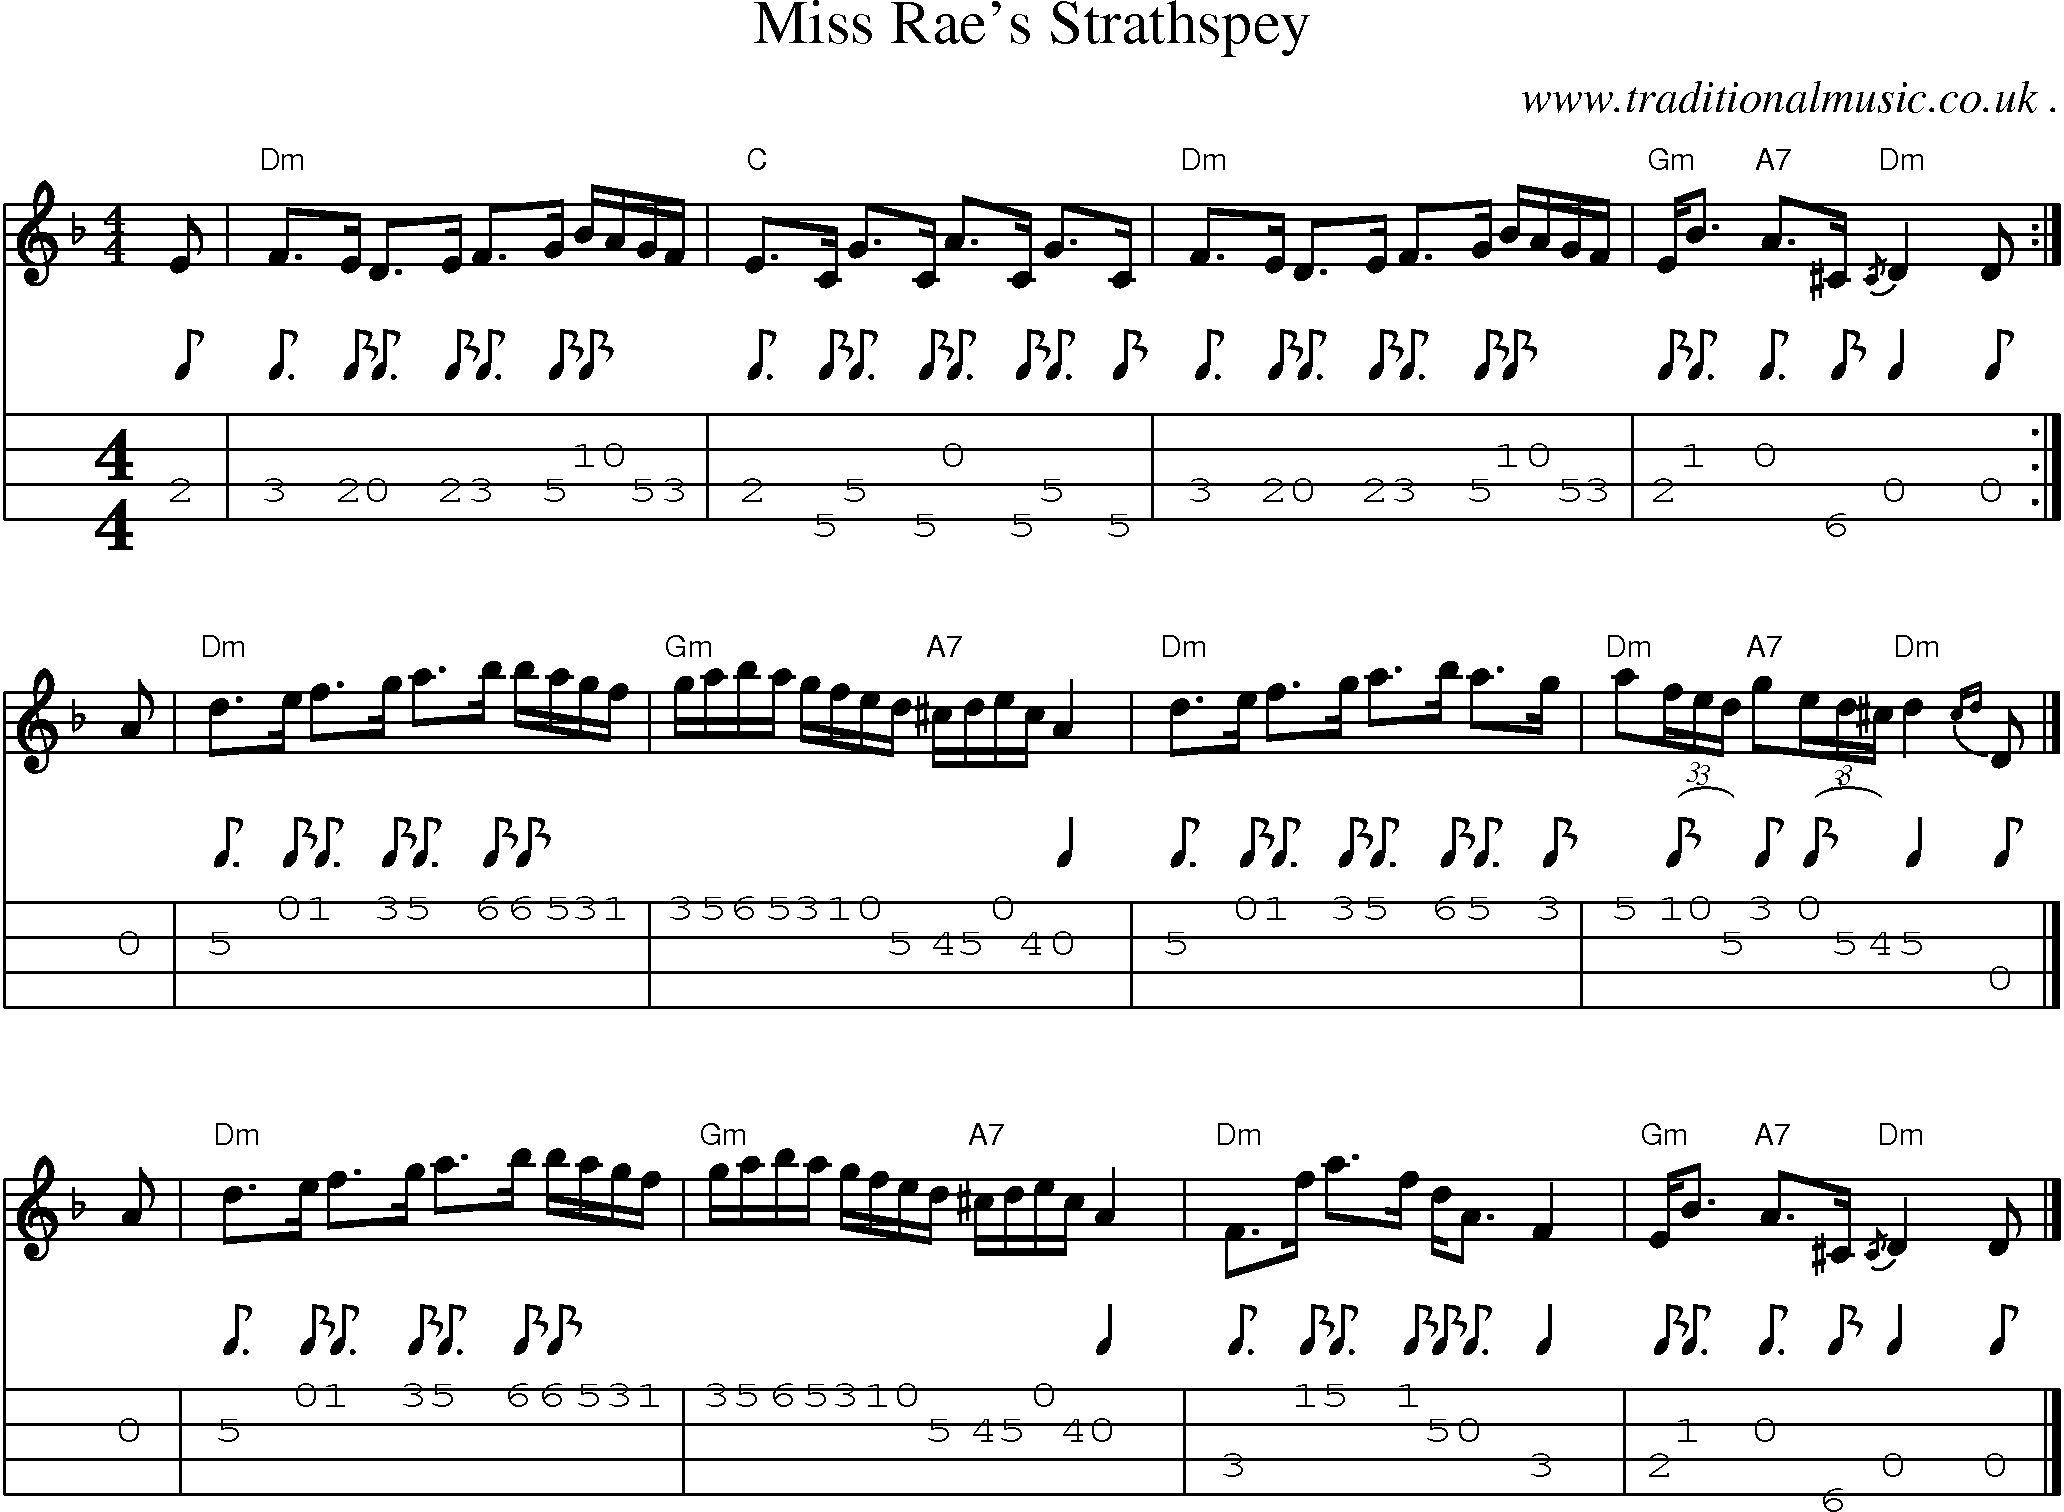 Sheet-music  score, Chords and Mandolin Tabs for Miss Raes Strathspey